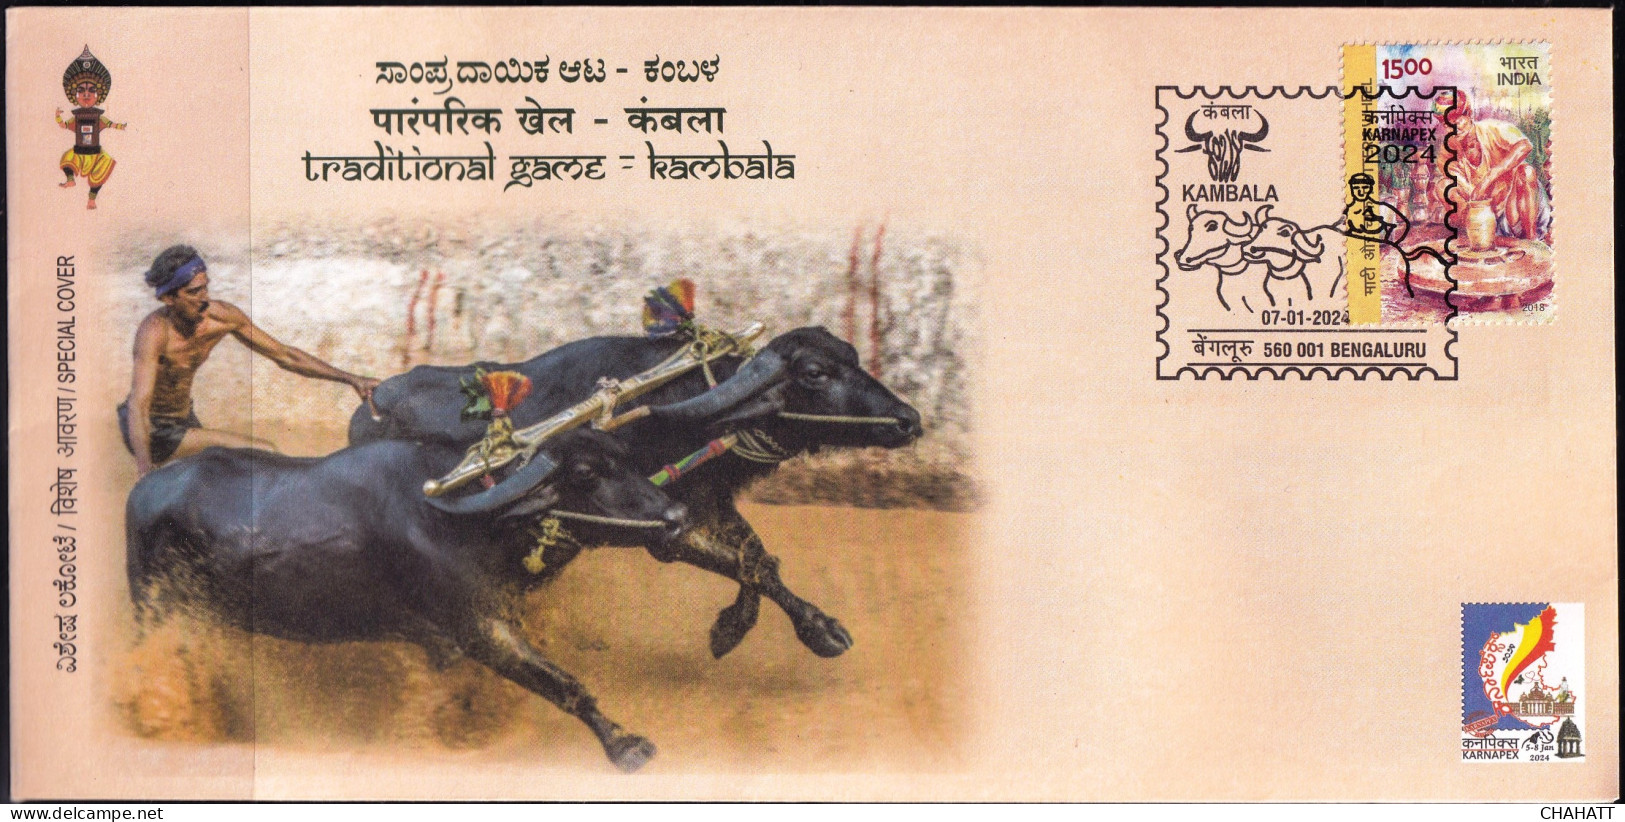 TRADITIONAL GAMES OF INDIA- KAMBALA- BUFFALO RACE- PICTORIAL CANCEL-SPECIAL COVER-INDIA POST-BX4-30 - Unclassified